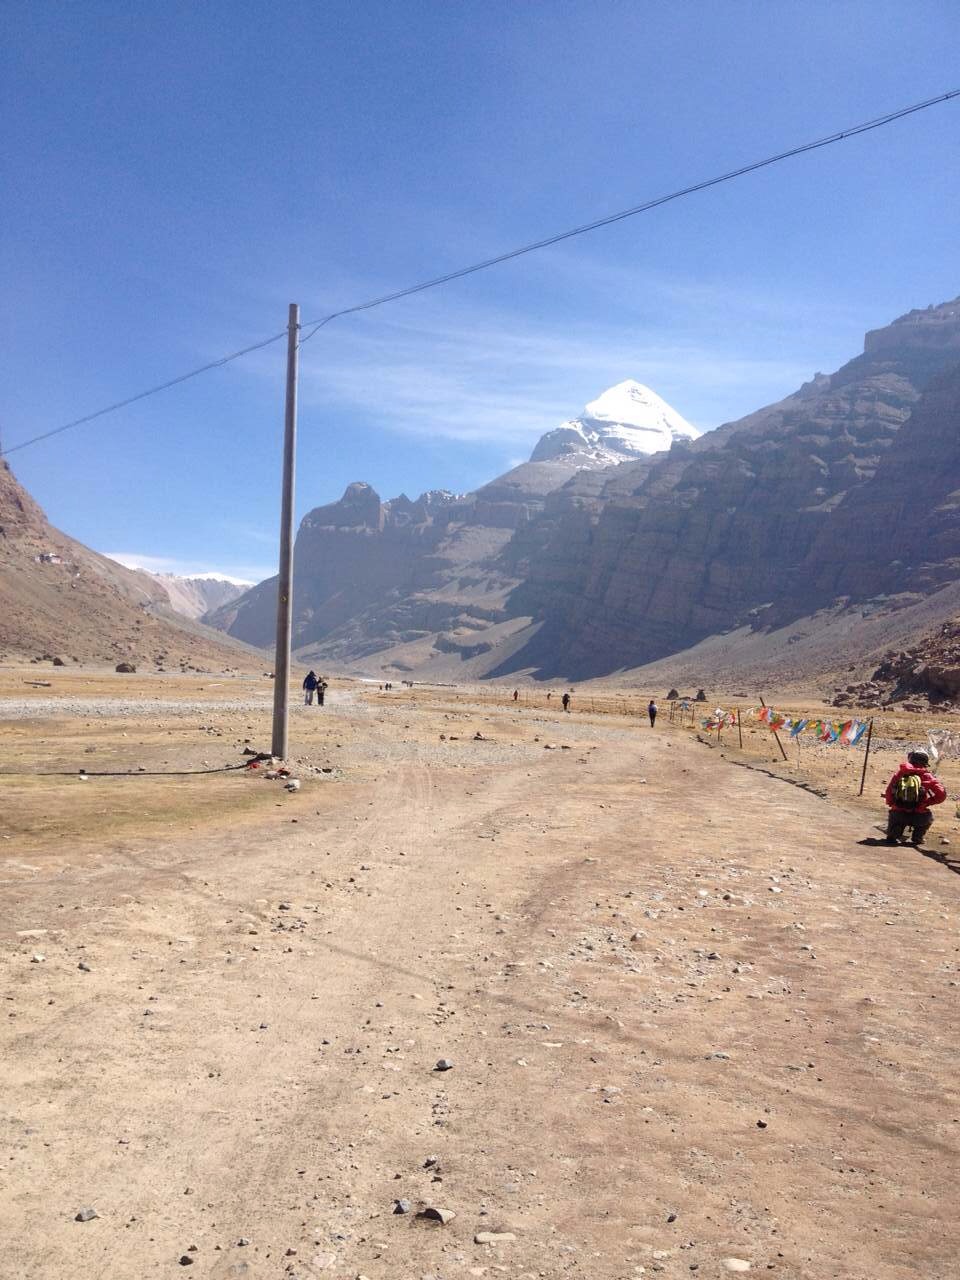 Mt. Kailash is almost around the corner! So excited!